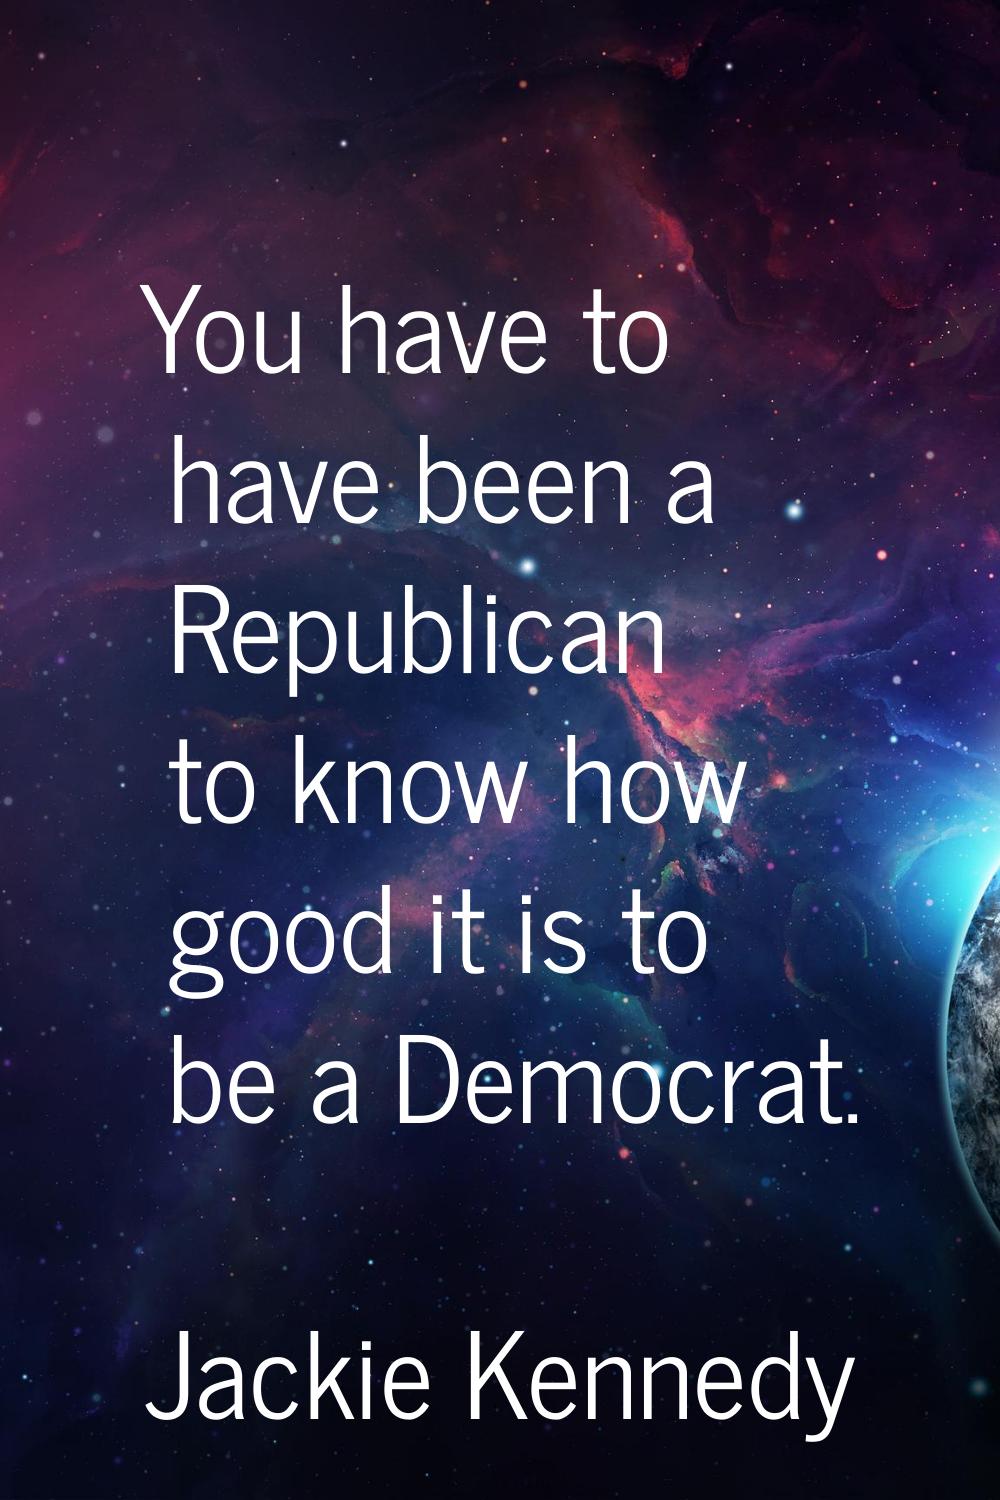 You have to have been a Republican to know how good it is to be a Democrat.